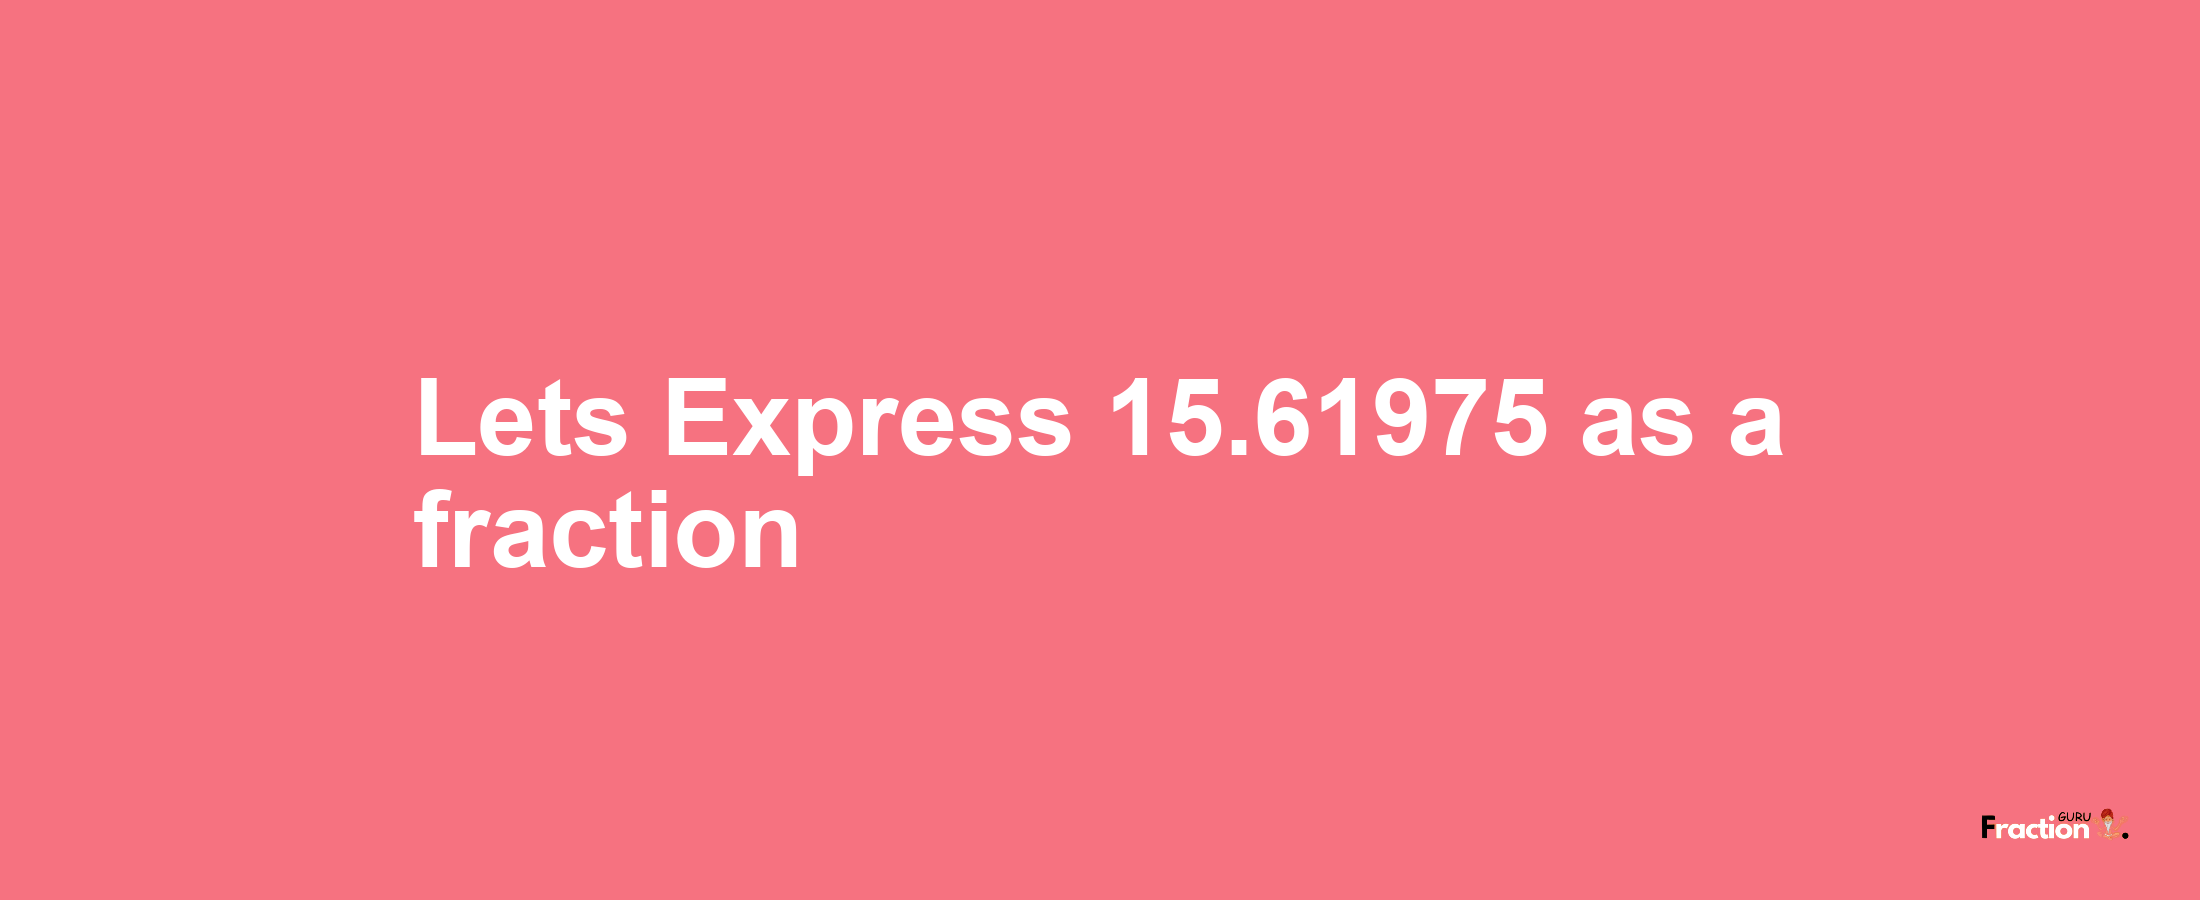 Lets Express 15.61975 as afraction